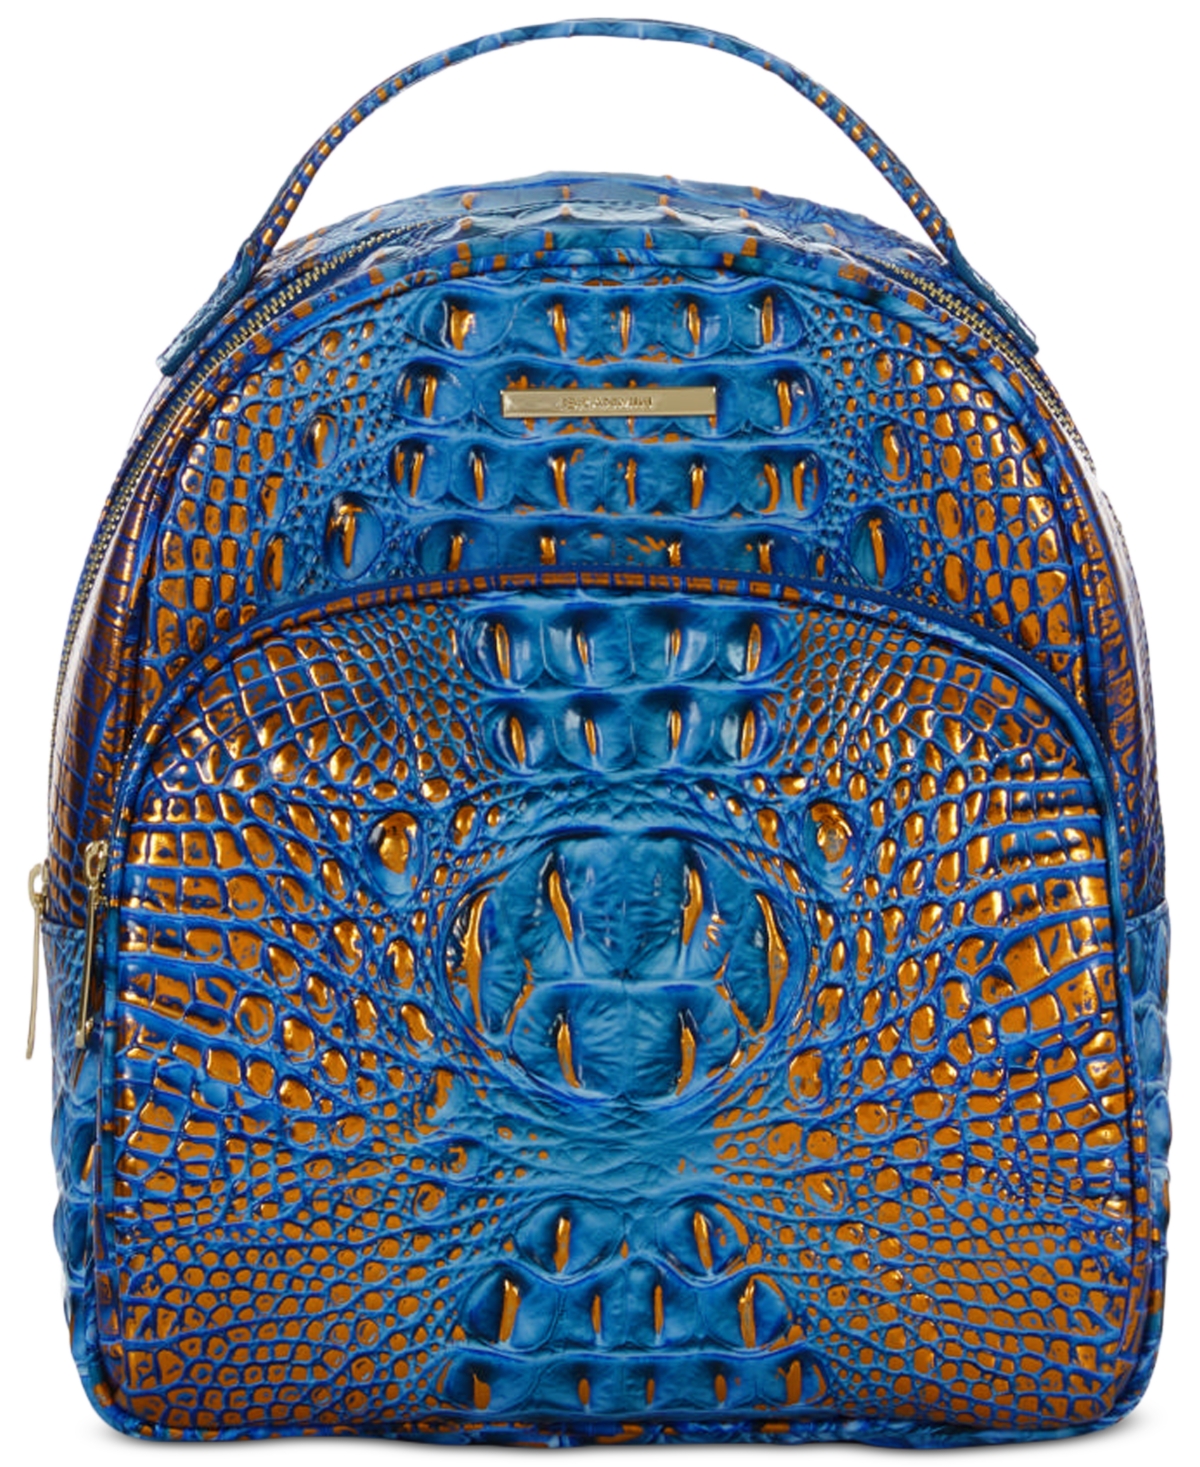 BRAHMIN CHELCY MELBOURNE EMBOSSED LEATHER BACKPACK